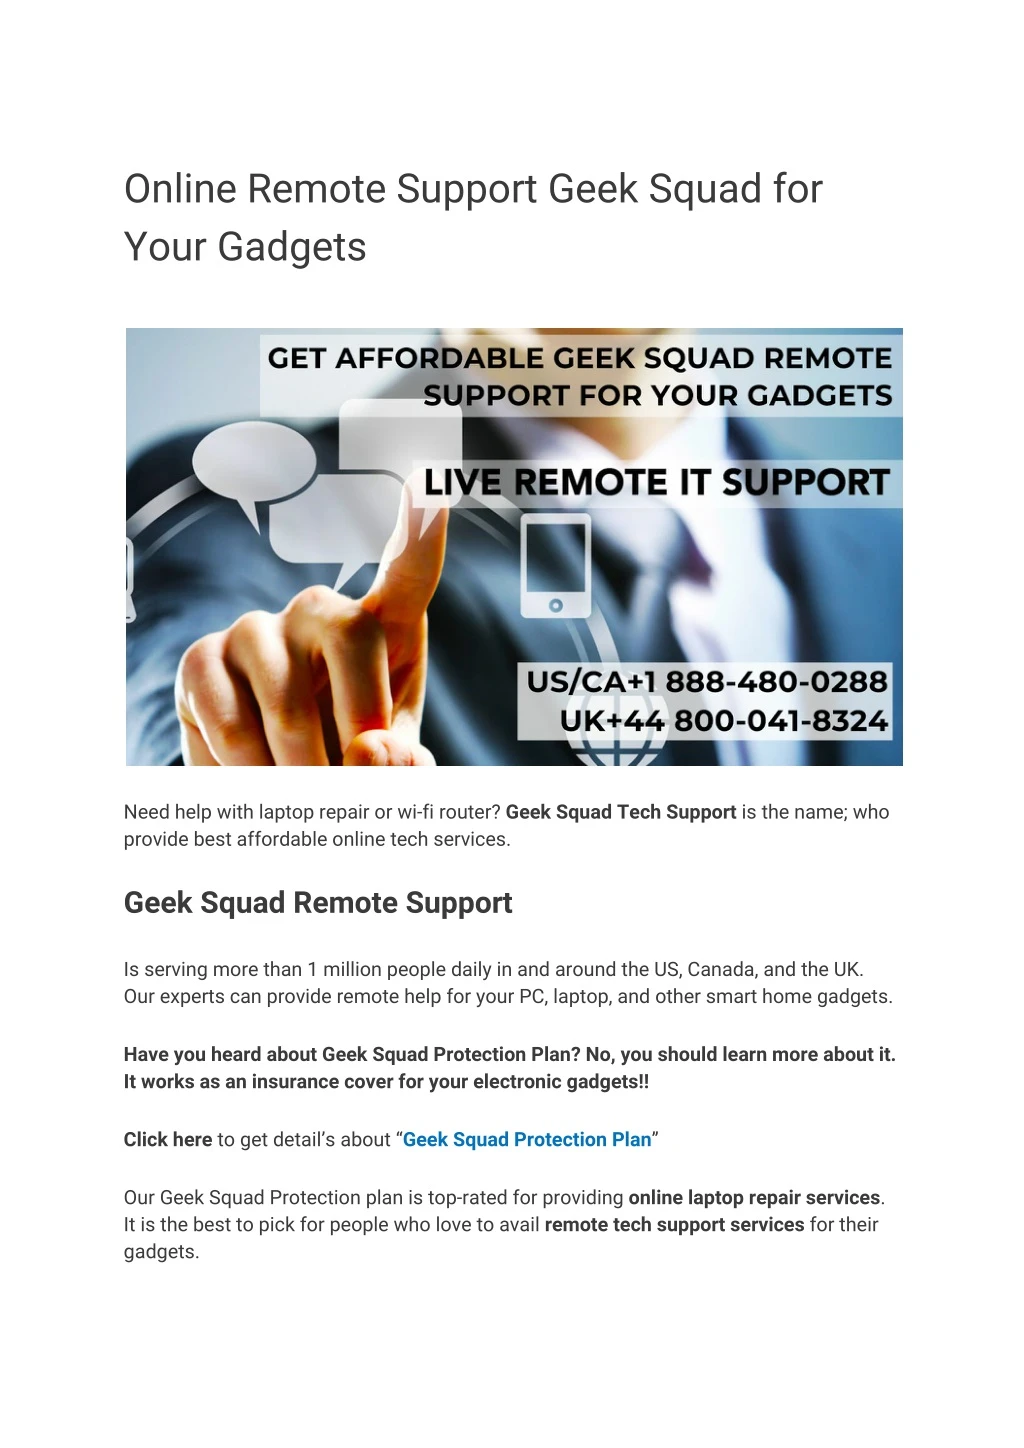 online remote support geek squad for your gadgets